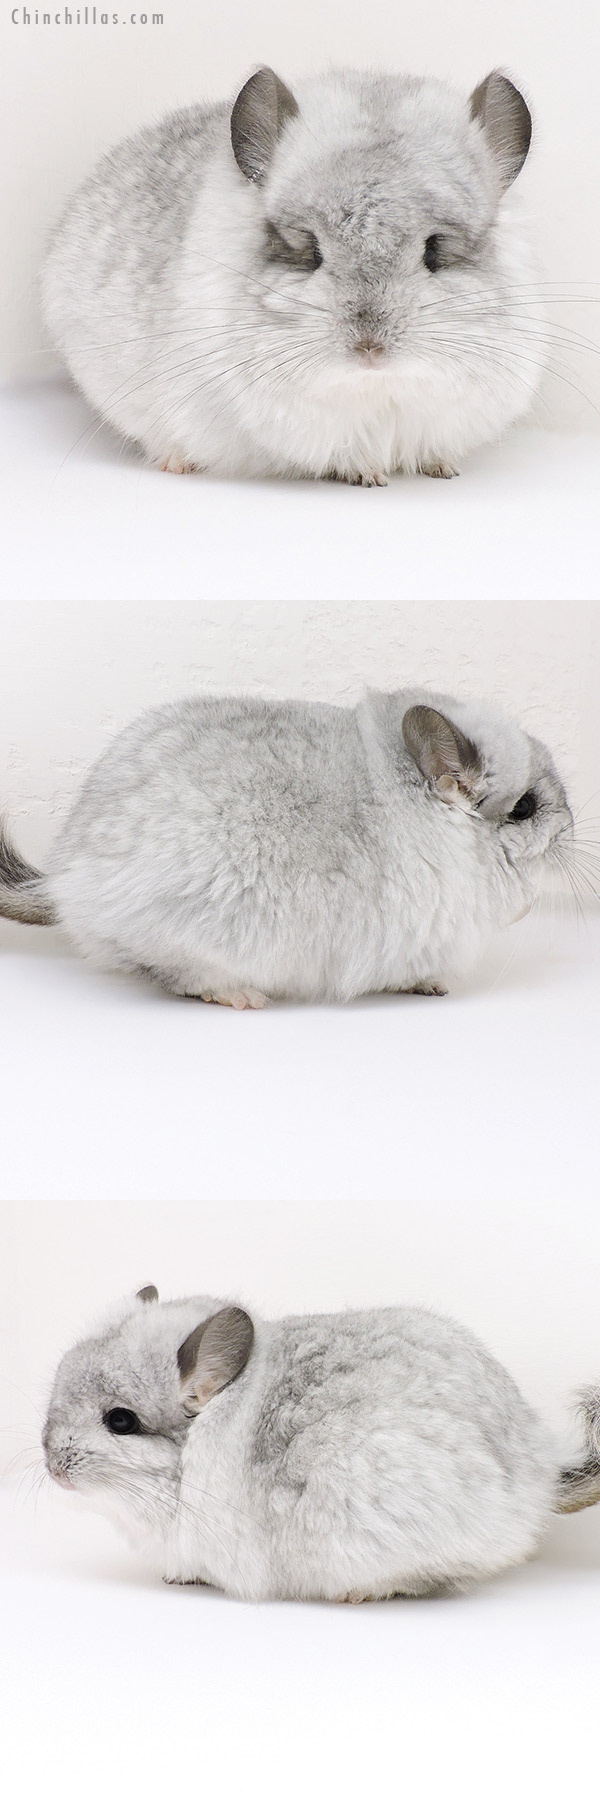 Chinchilla or related item offered for sale or export on Chinchillas.com - 18243 Extra Large Exceptional Silver Mosaic G2  Royal Persian Angora Male Chinchilla